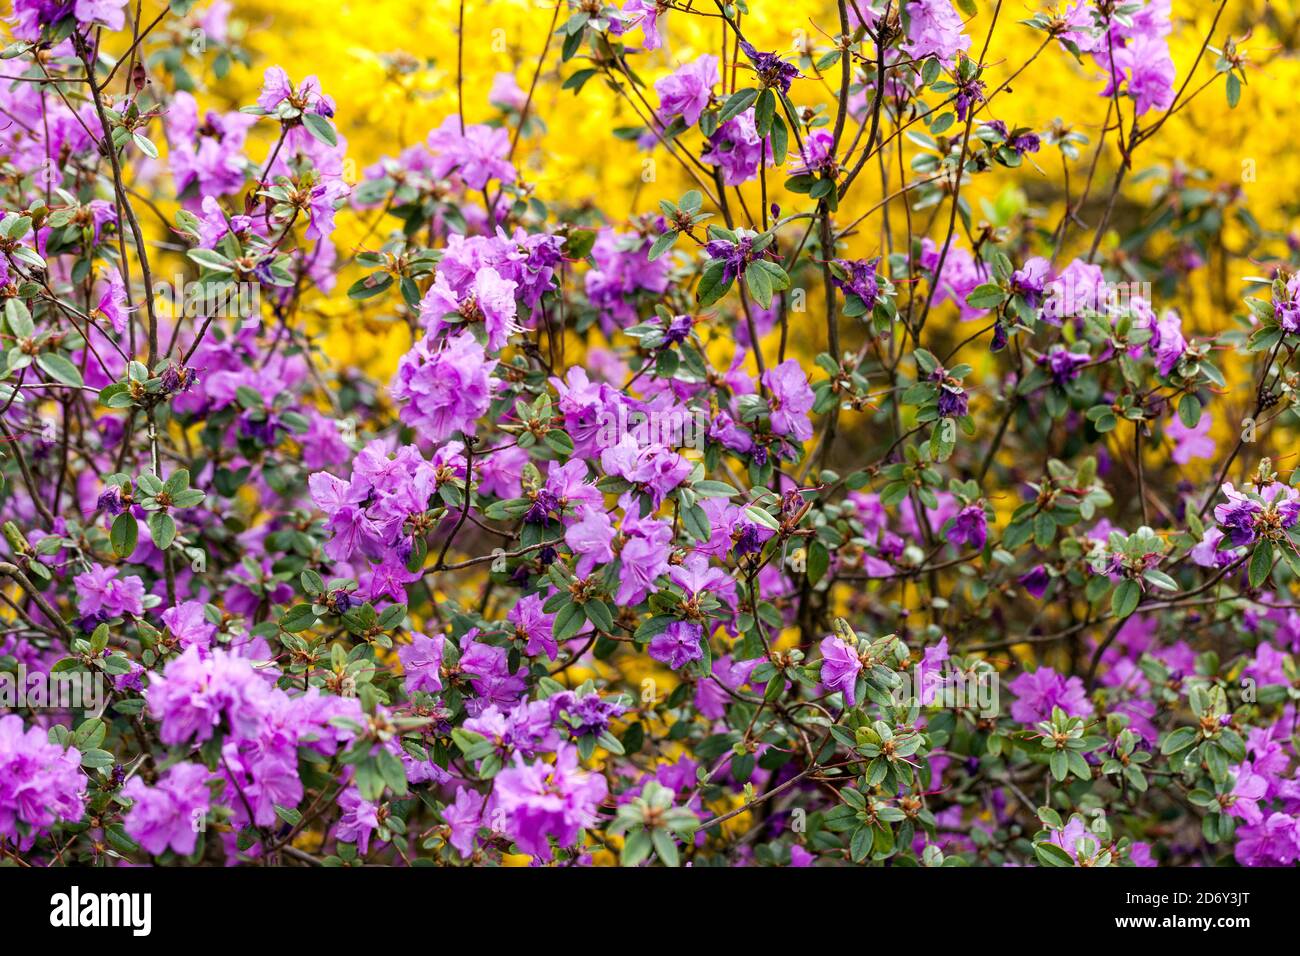 Flowering shrubs trees Springtime Purple Rhododendron dauricum Yellow Forsythia Blooming April Yellow Purple Blossoms Garden Spring Plants in Bloom Stock Photo